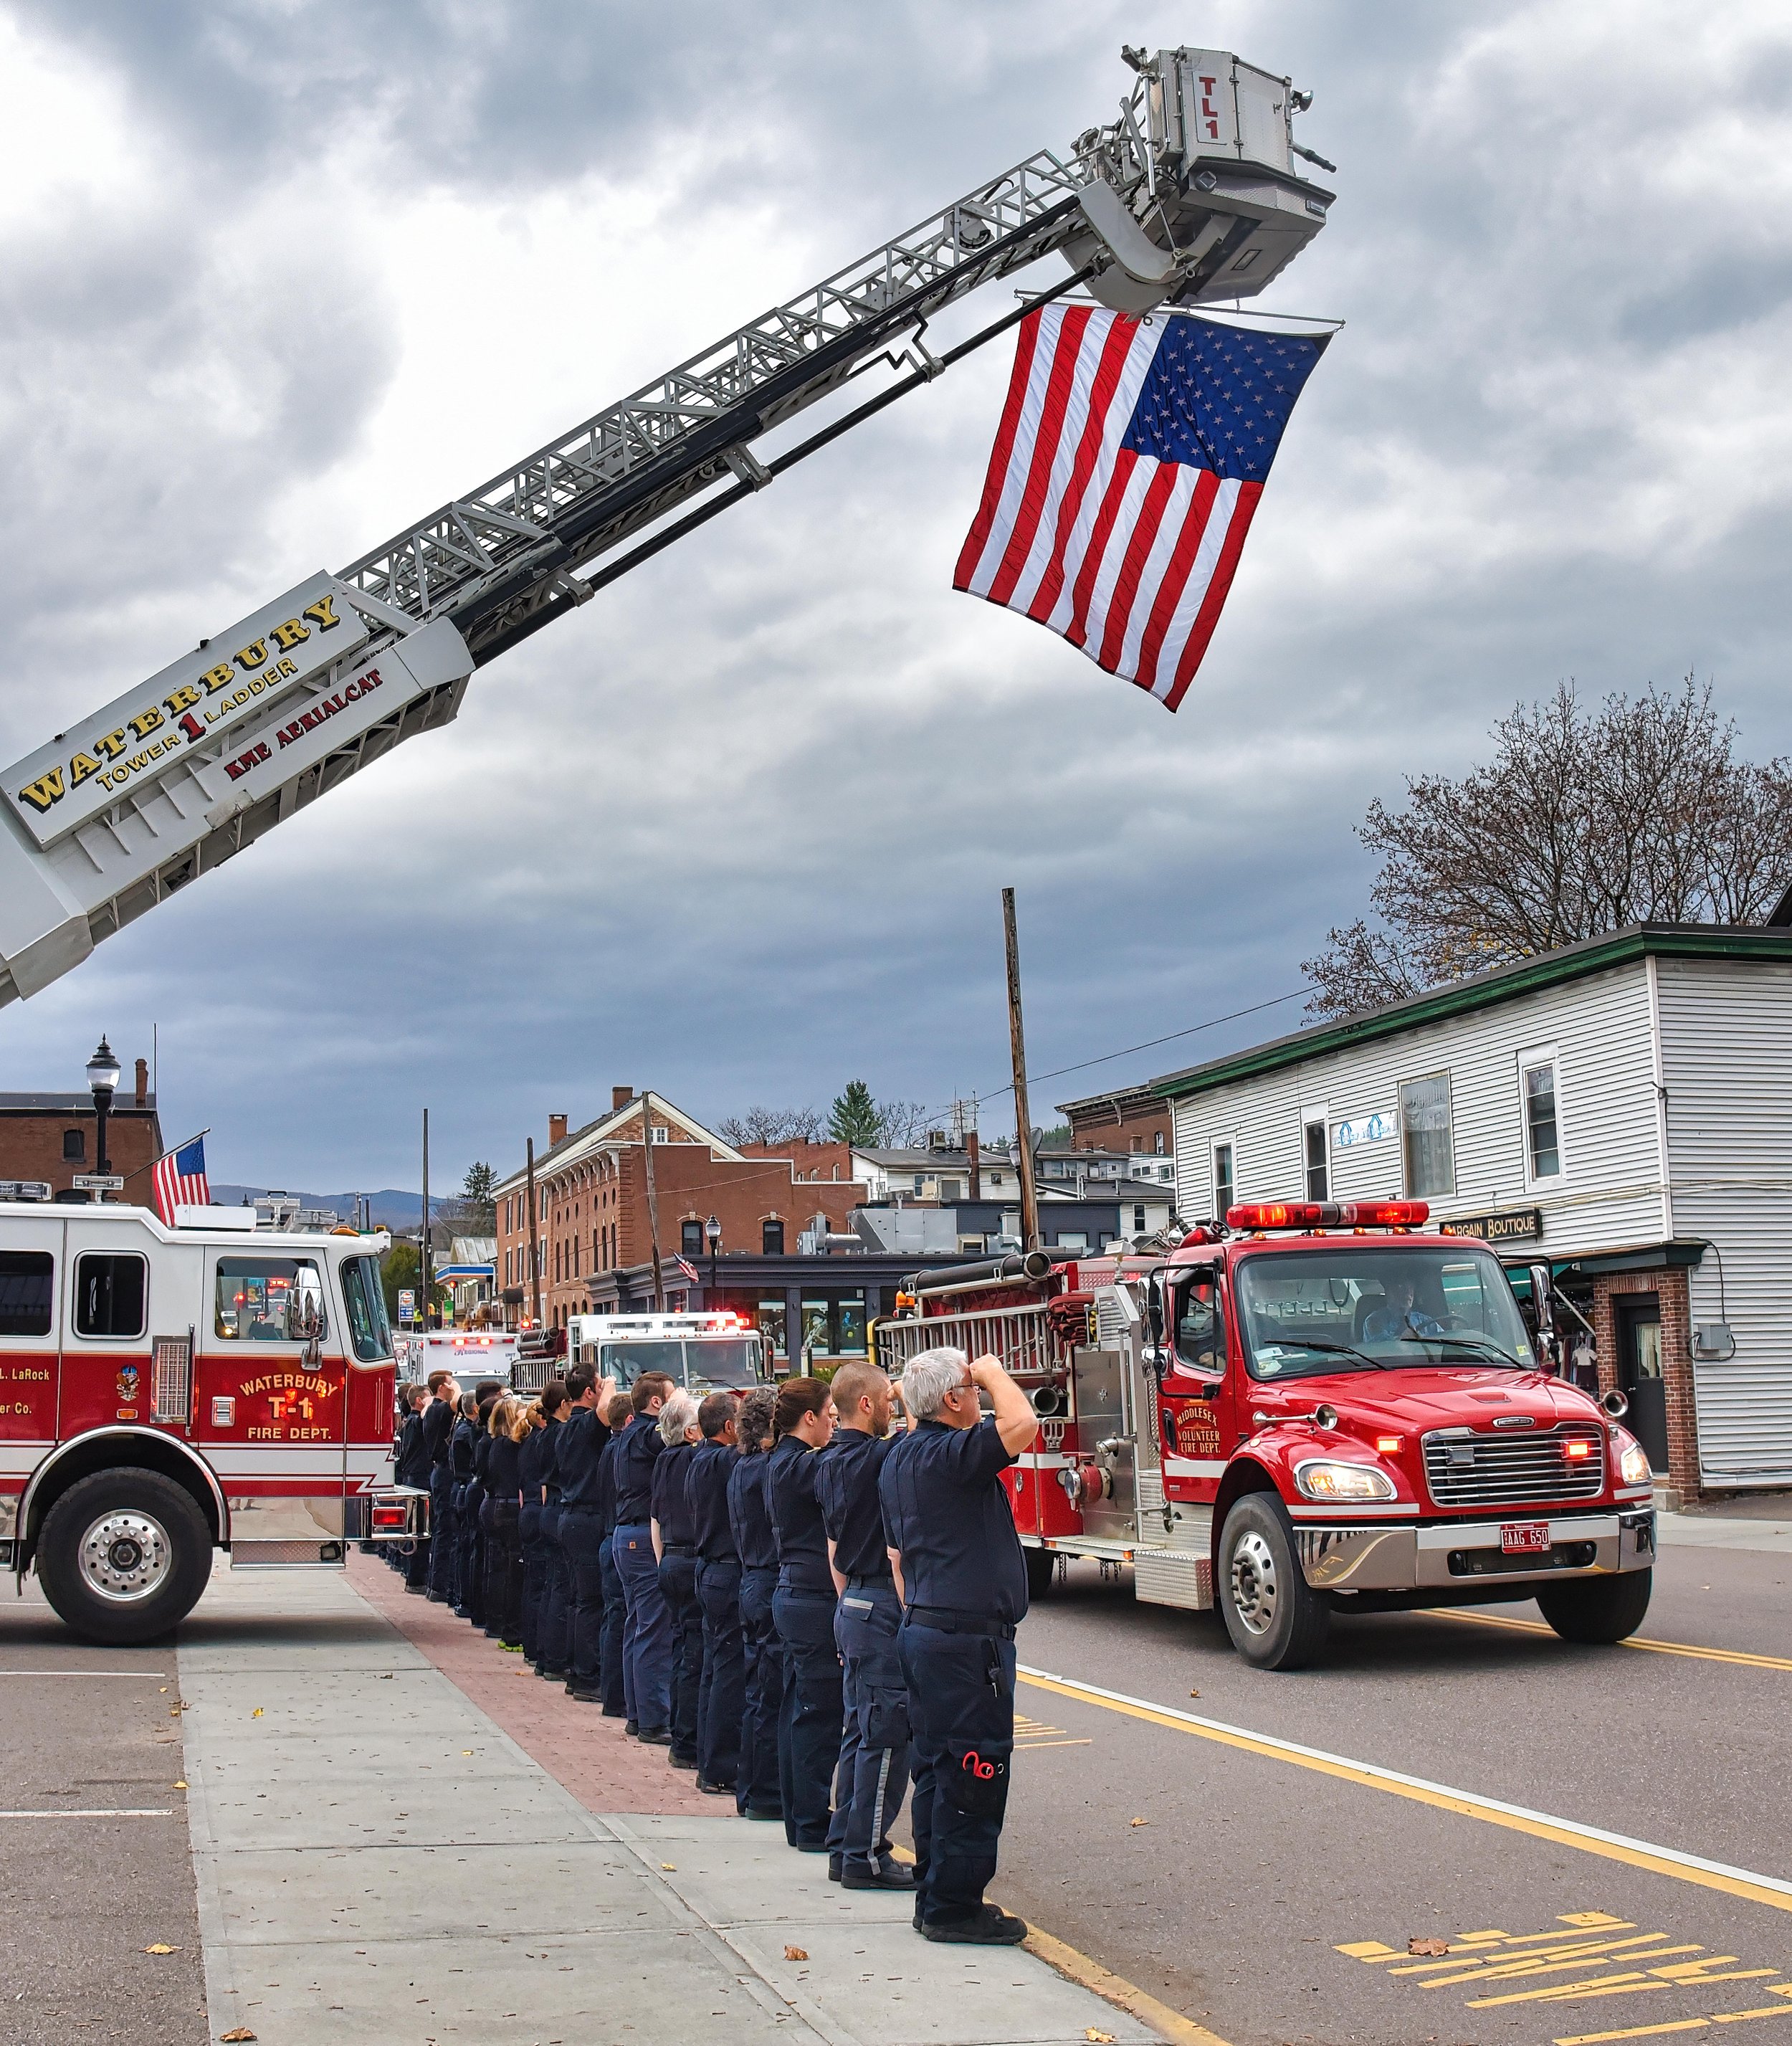  Waterbury Ambulance Service members in dress uniforms salute the passing vehicles. Photo by Gordon Miller 